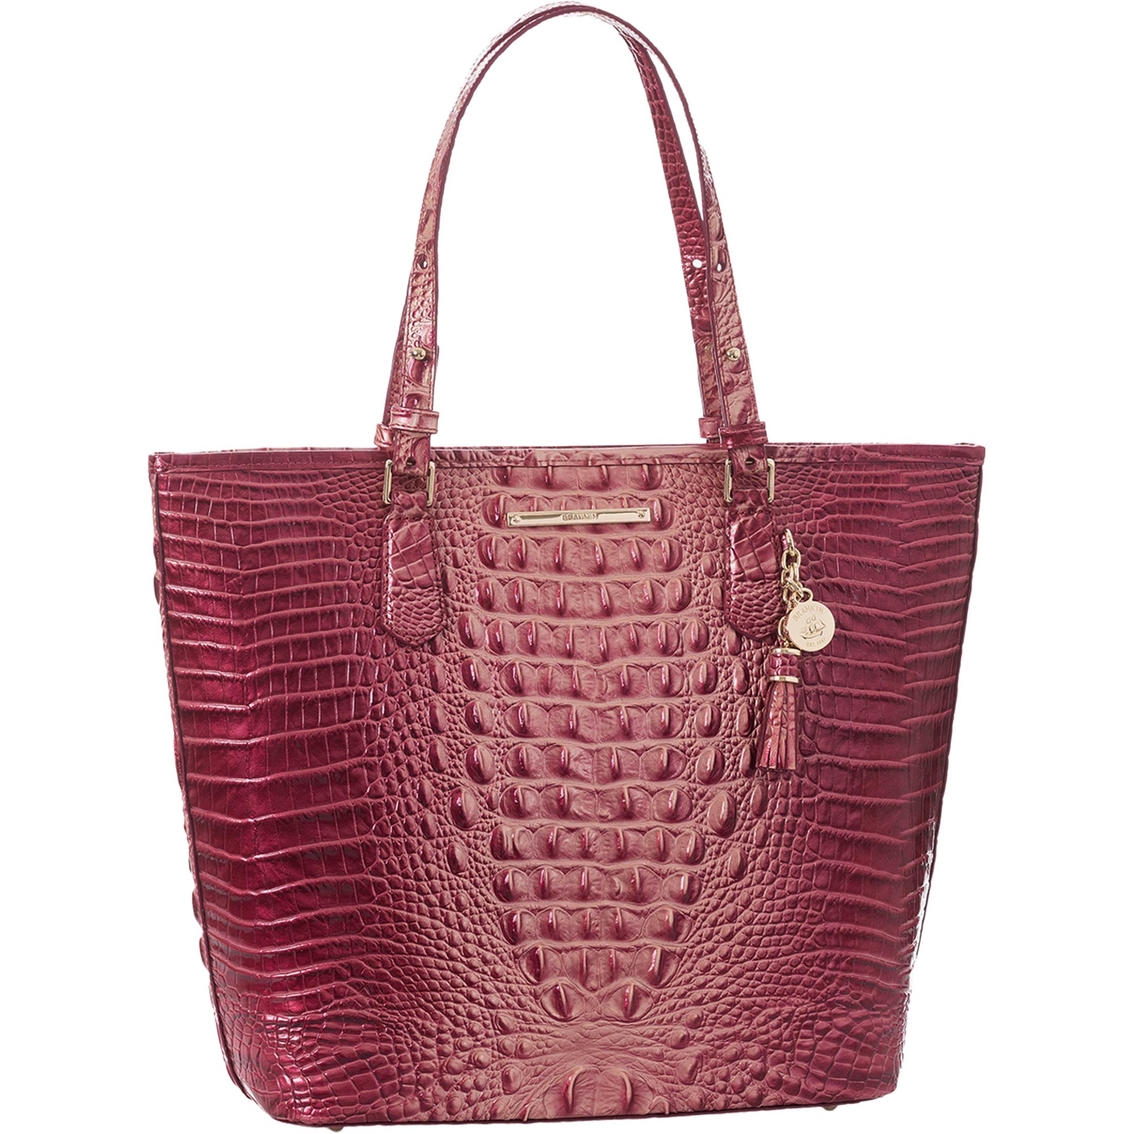 Brahmin Asher Melbourne Lotus Leather Tote - Image 2 of 4